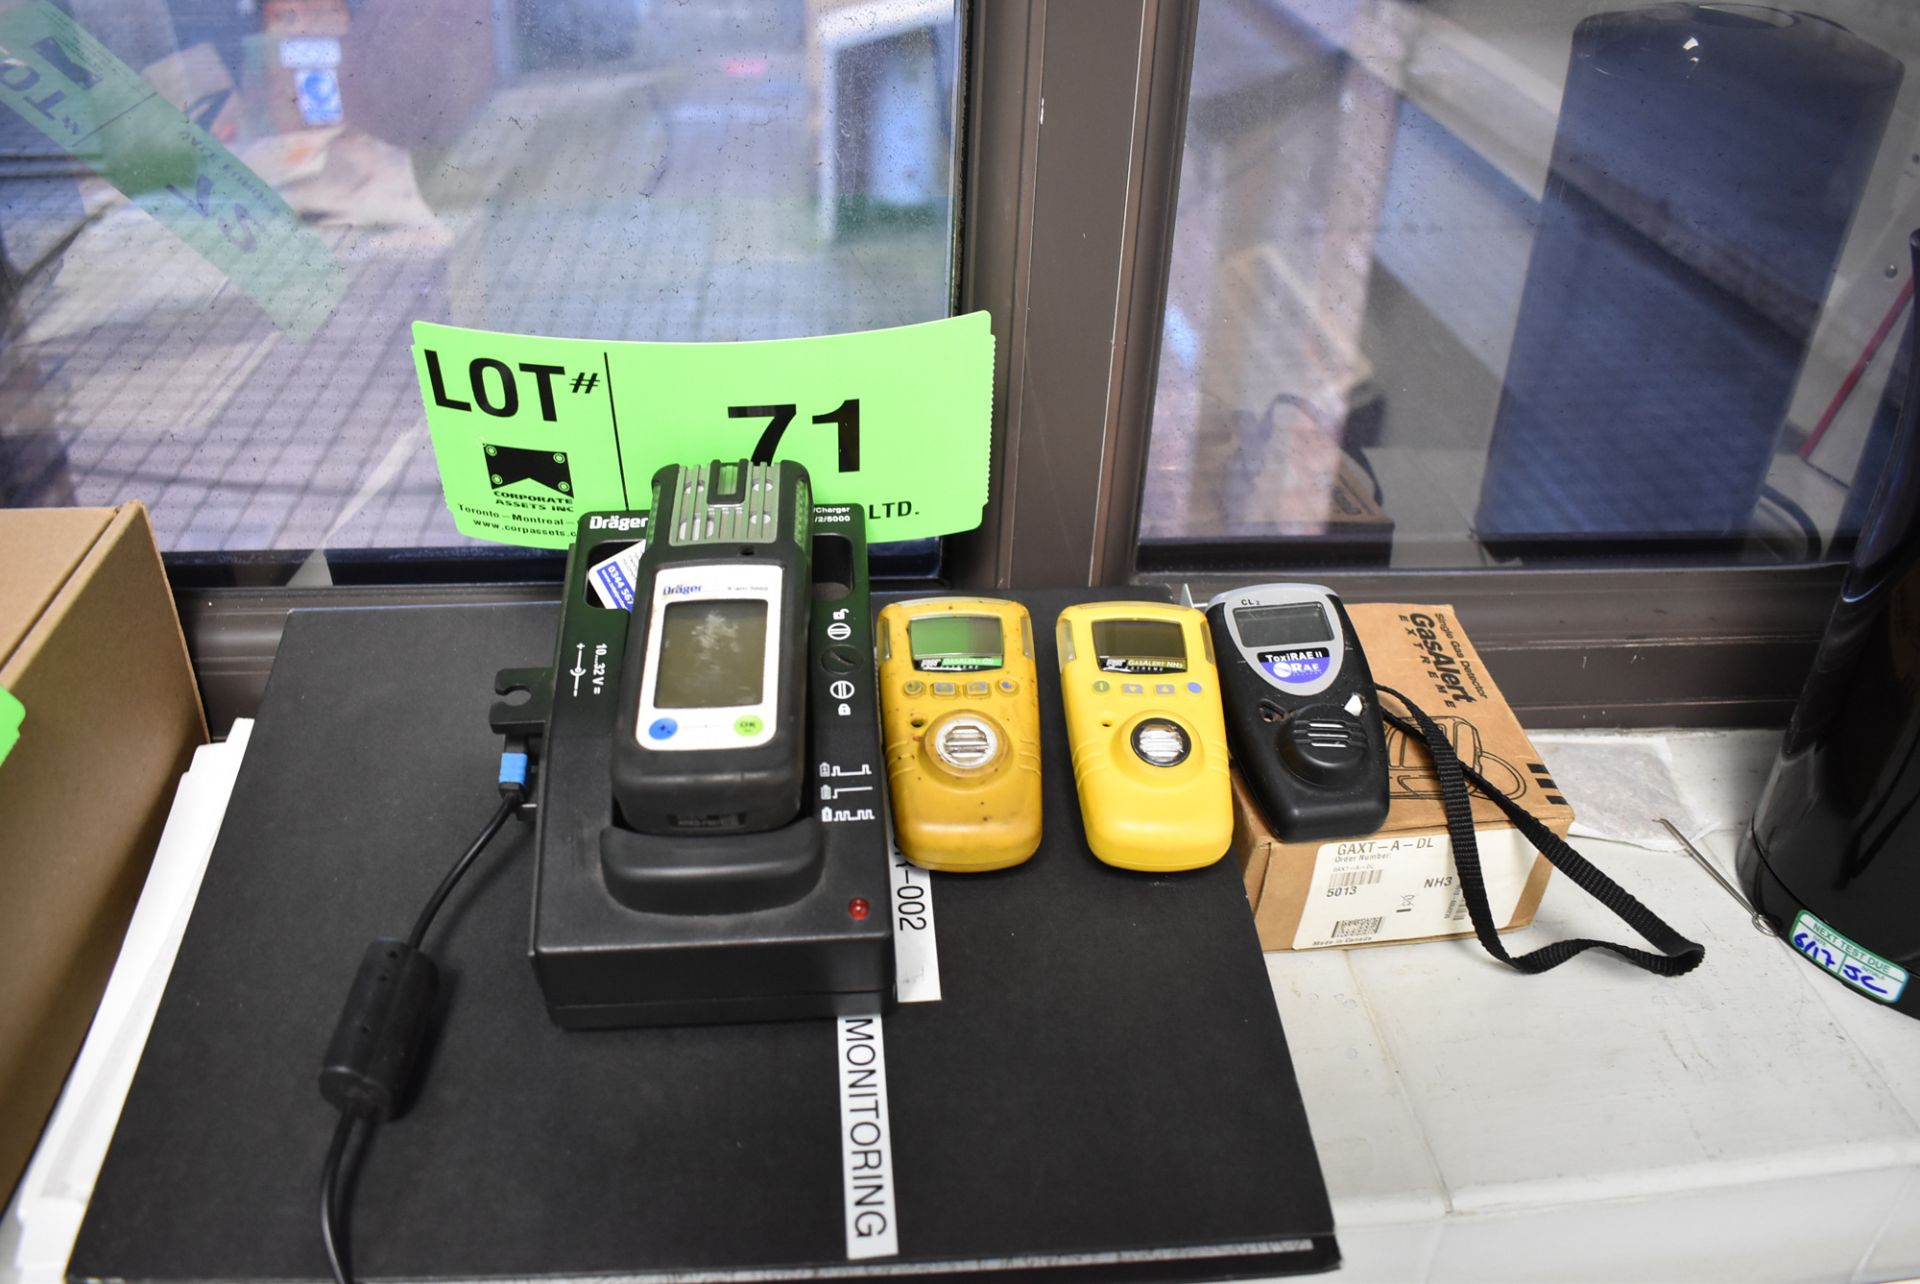 LOT/ DRAGER DIGITAL PERSONAL GAS MONITORS (ROOM 264A) [RIGGING FEES FOR LOT #71 - £35 PLUS